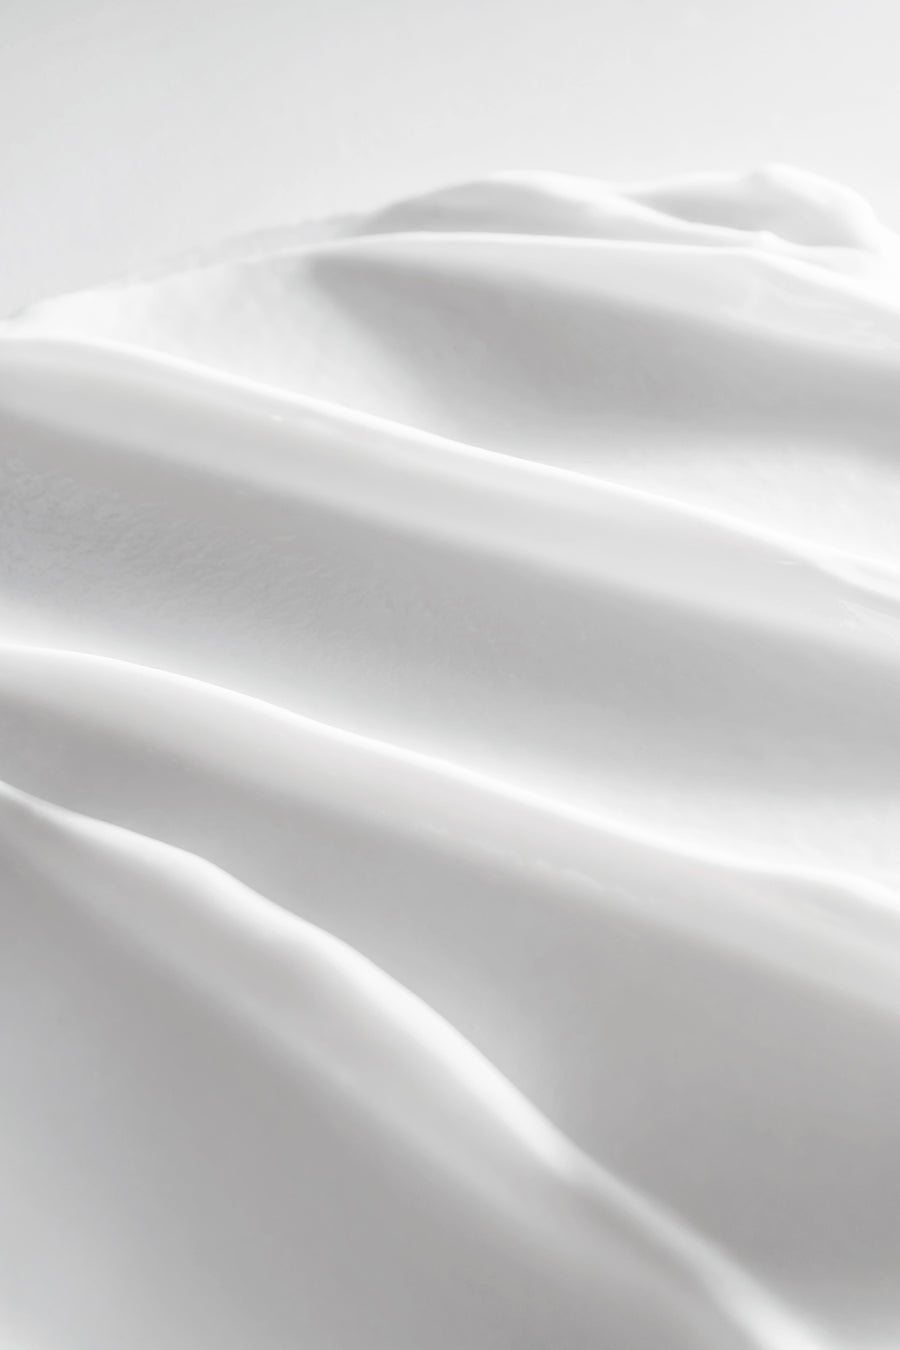 waves of white body butter